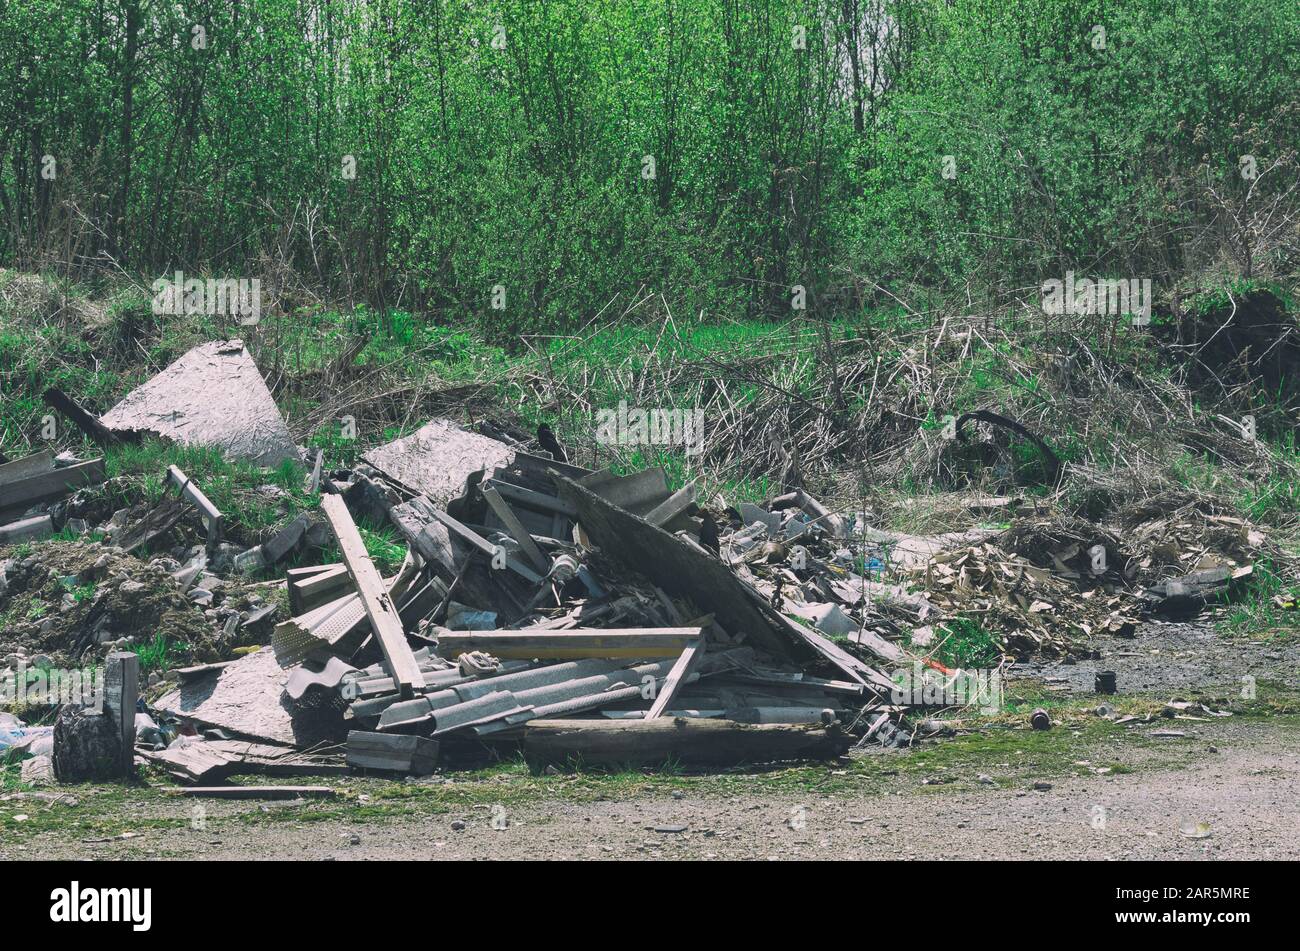 Pile of construction debris and waste near the spring young forest Stock Photo